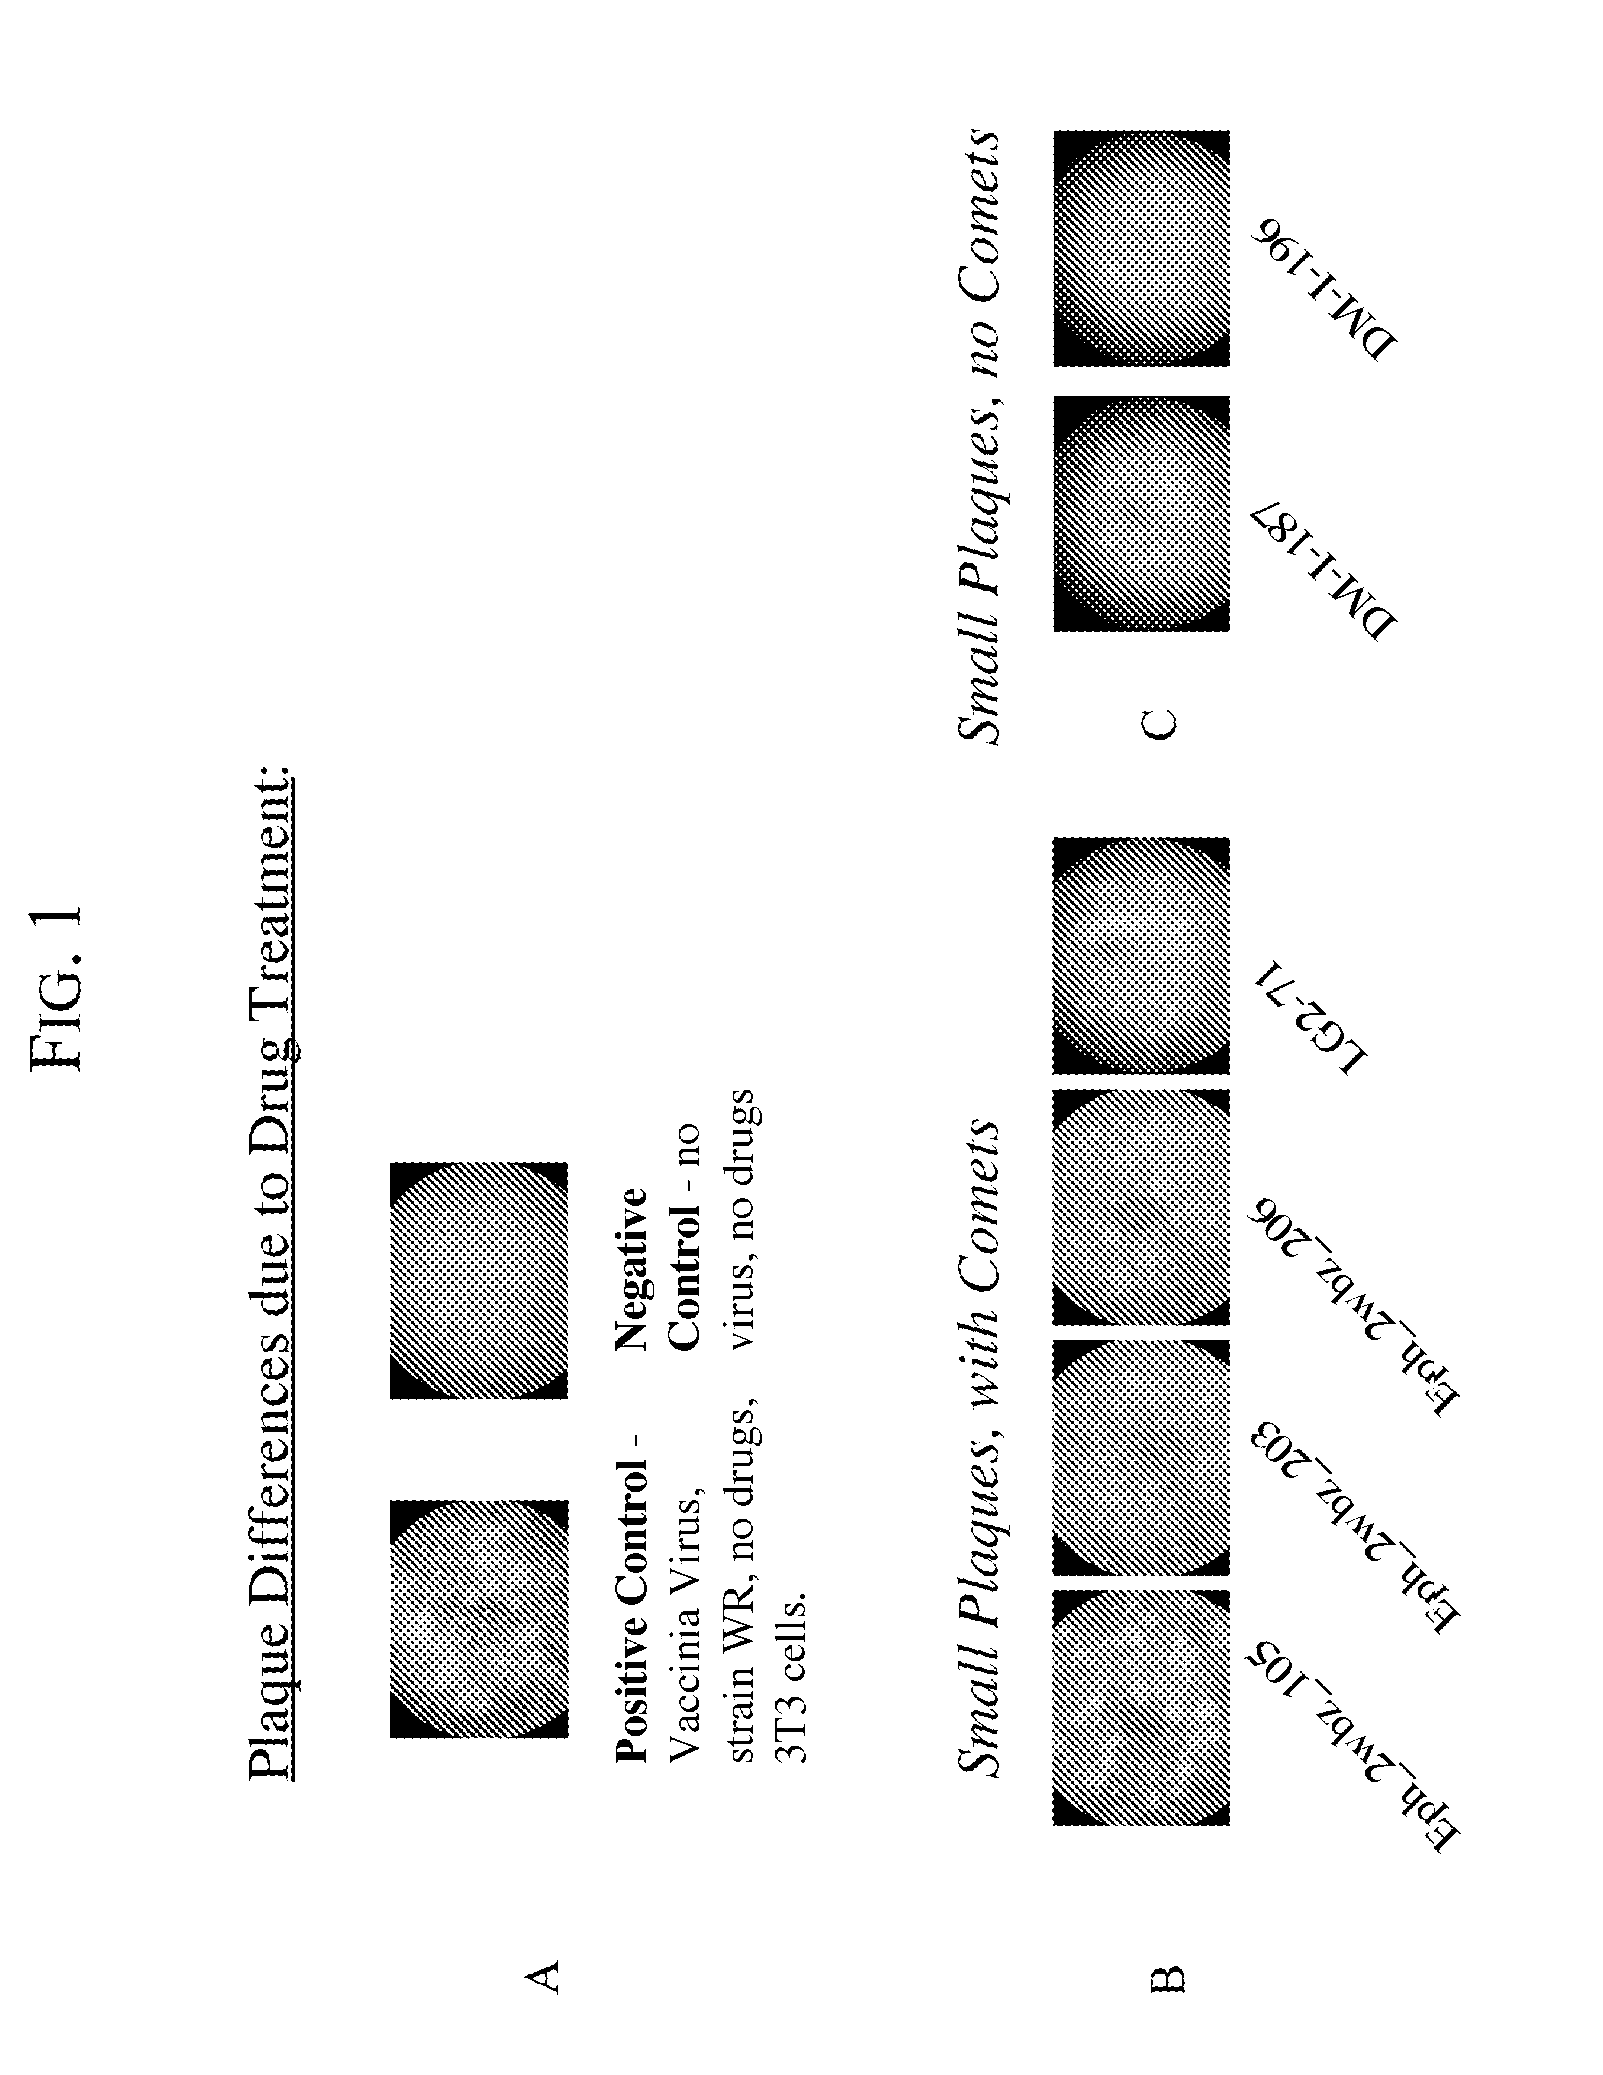 Kinase inhibitors for preventing or treating pathogen infection and method of use thereof